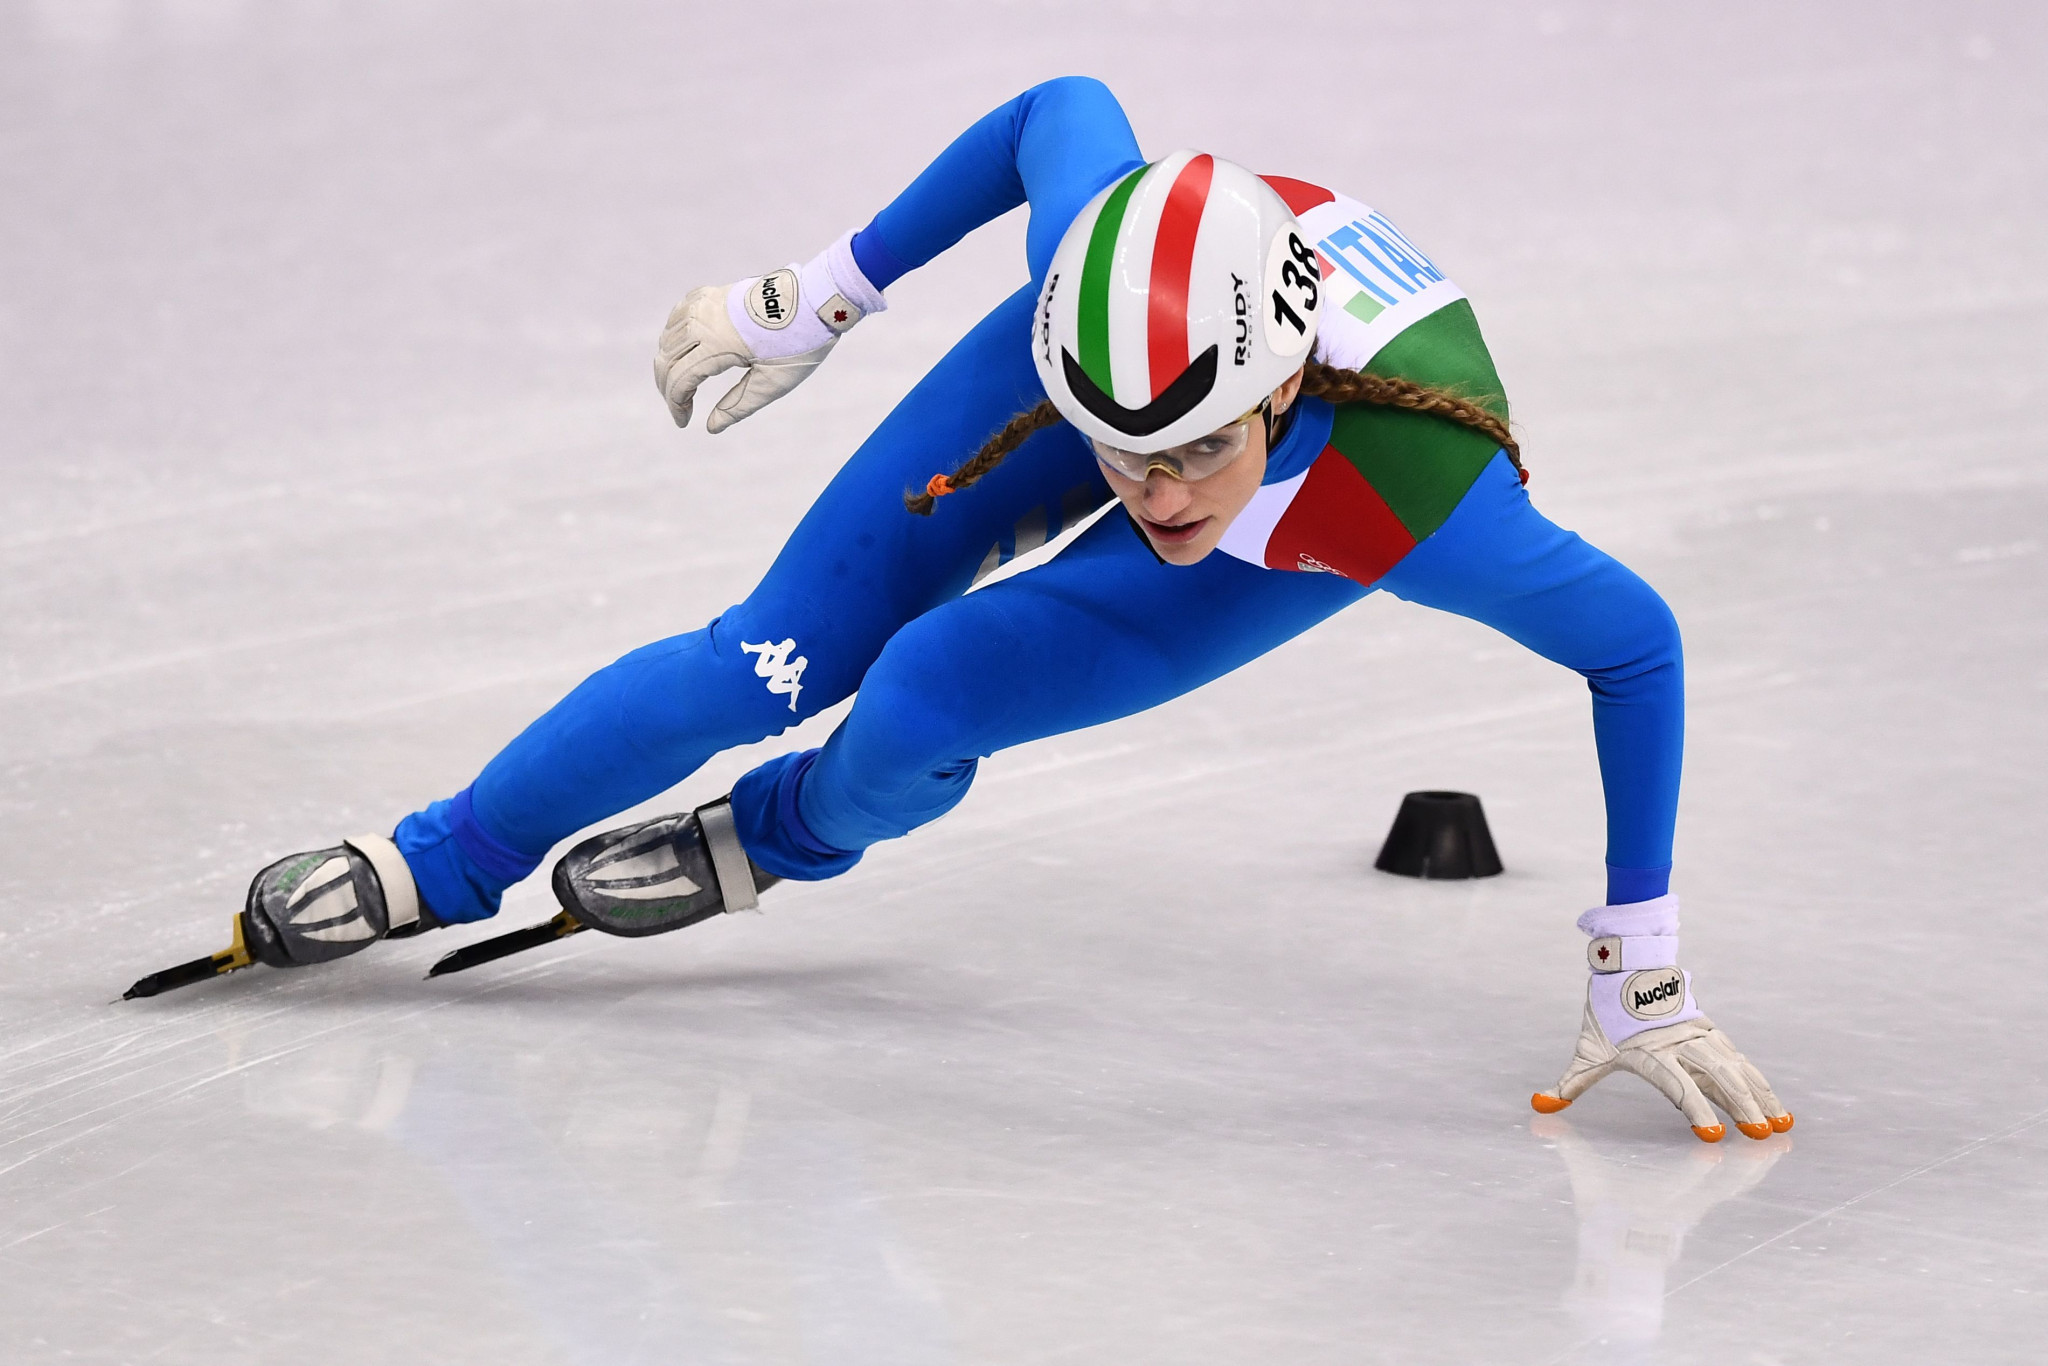 Italy's Valcepina claims women's 500m crown in front of home crowd at ISU Short Track World Cup